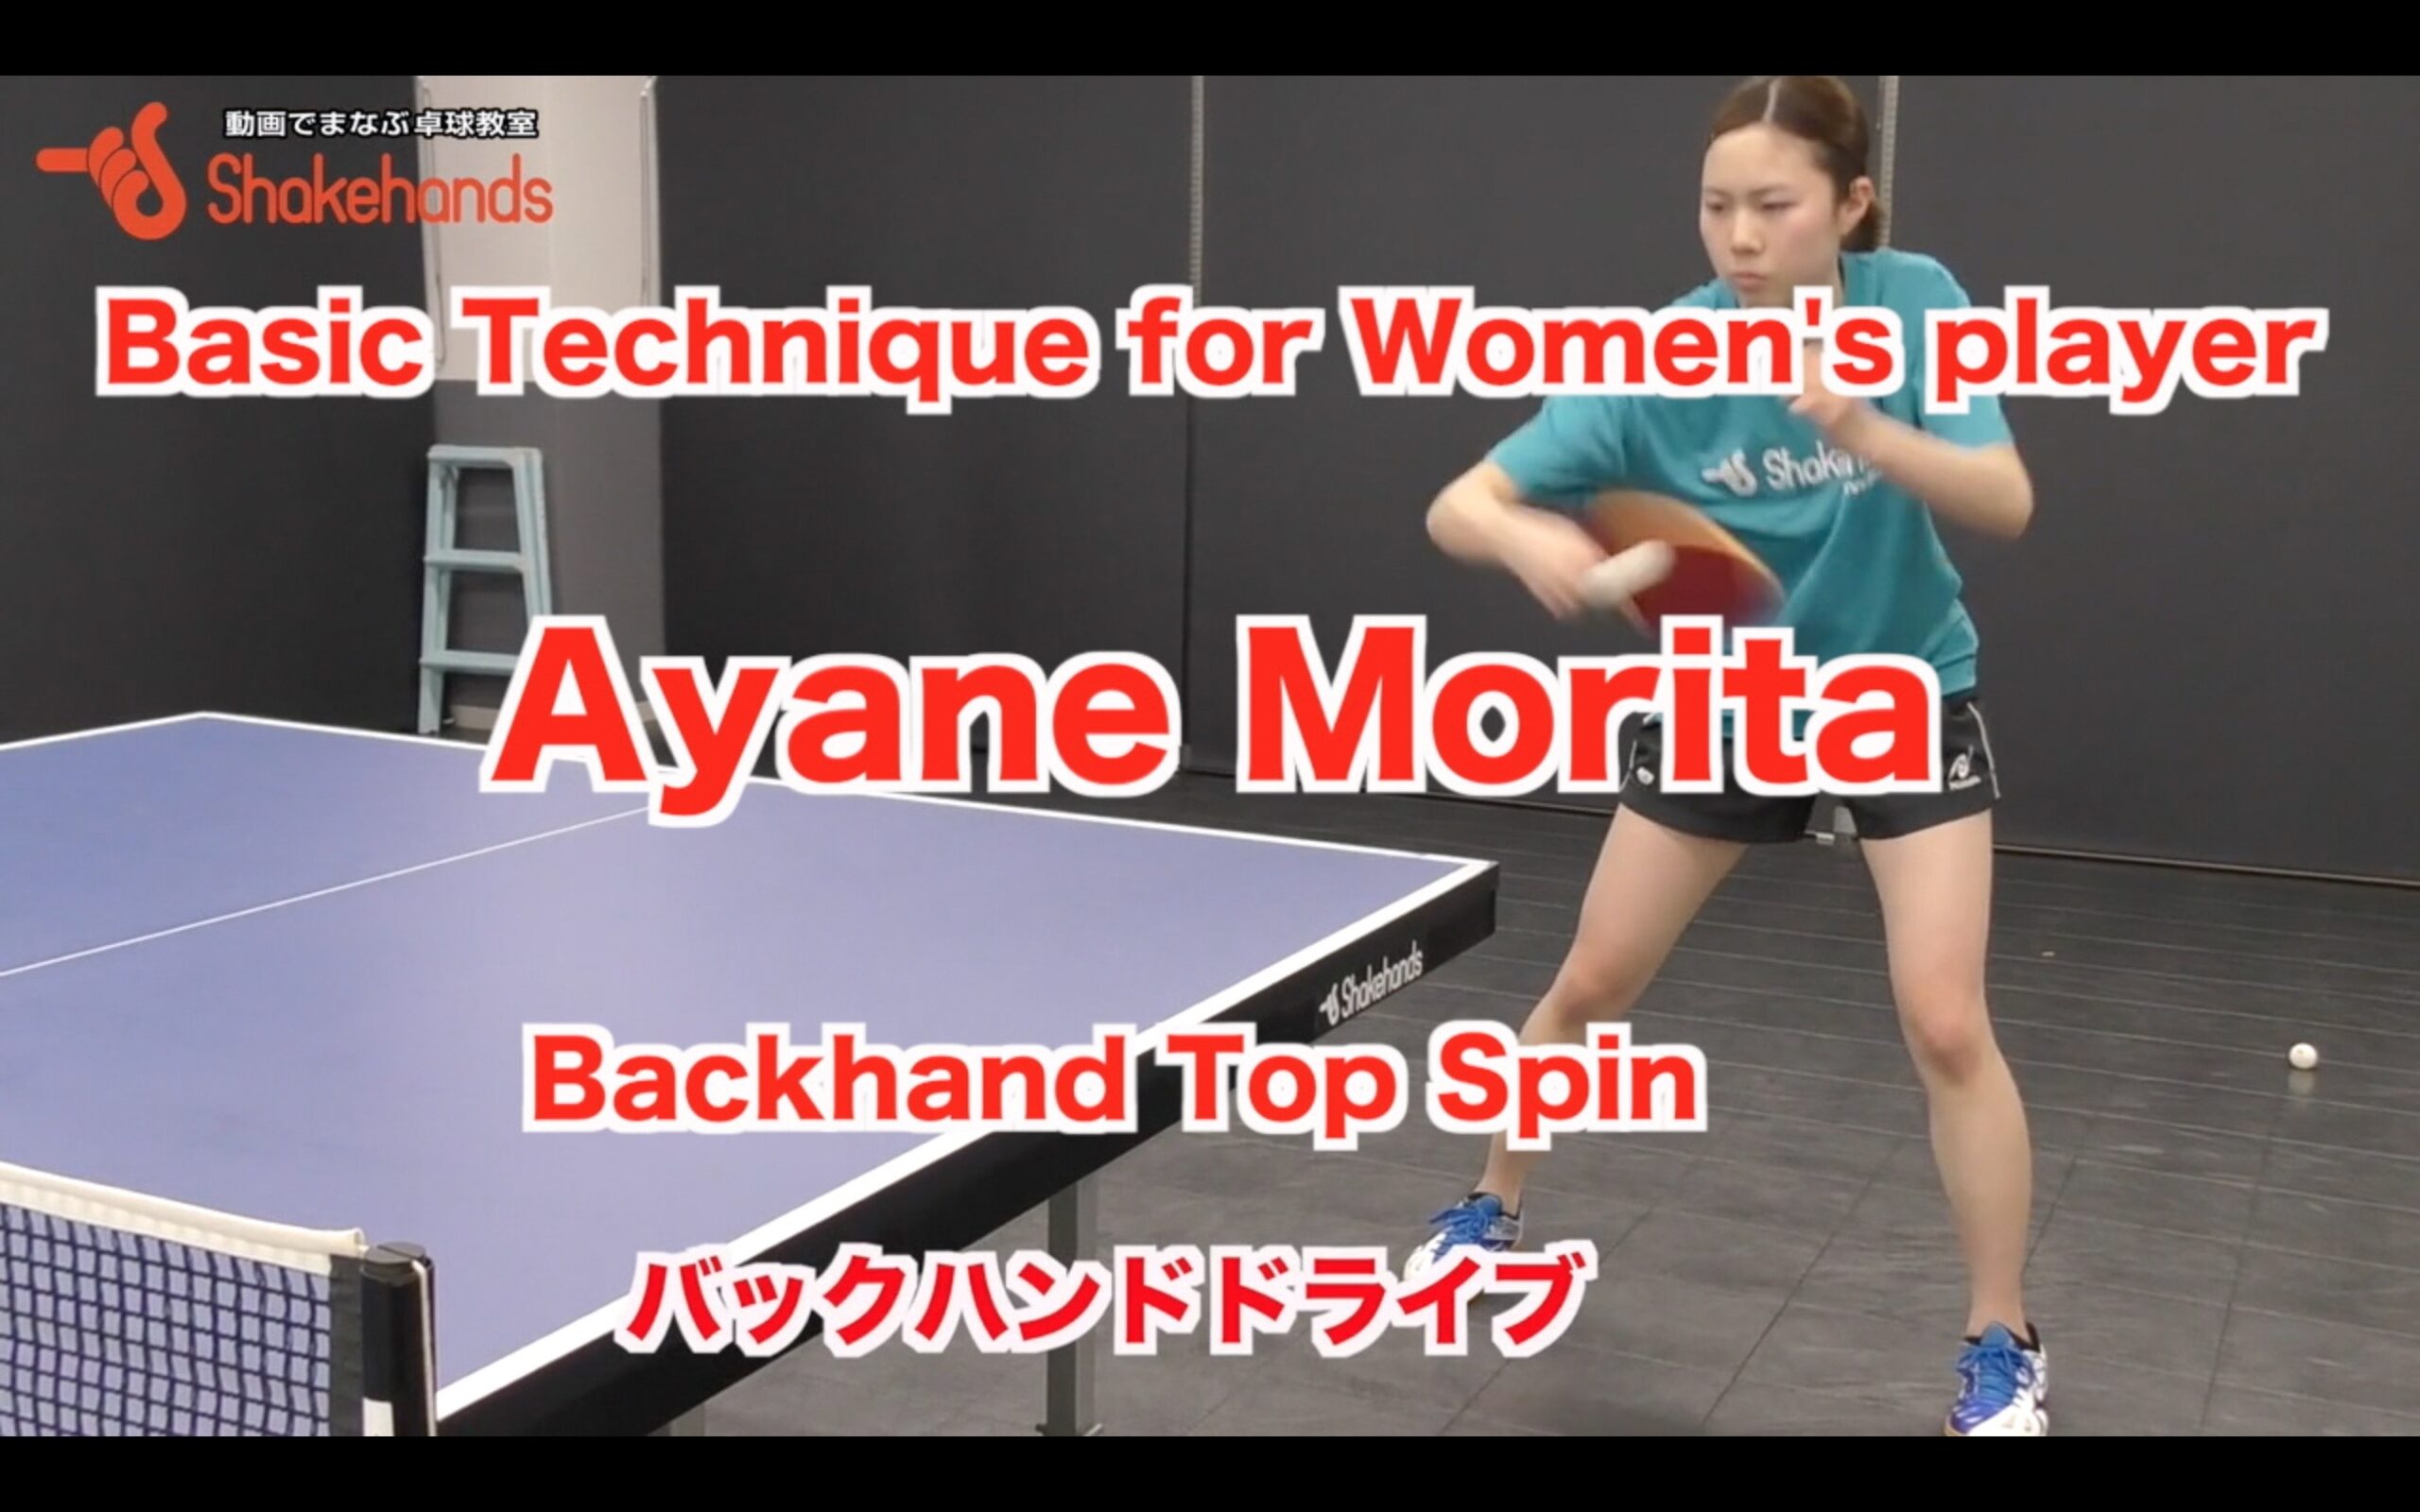 Backhand top Spin